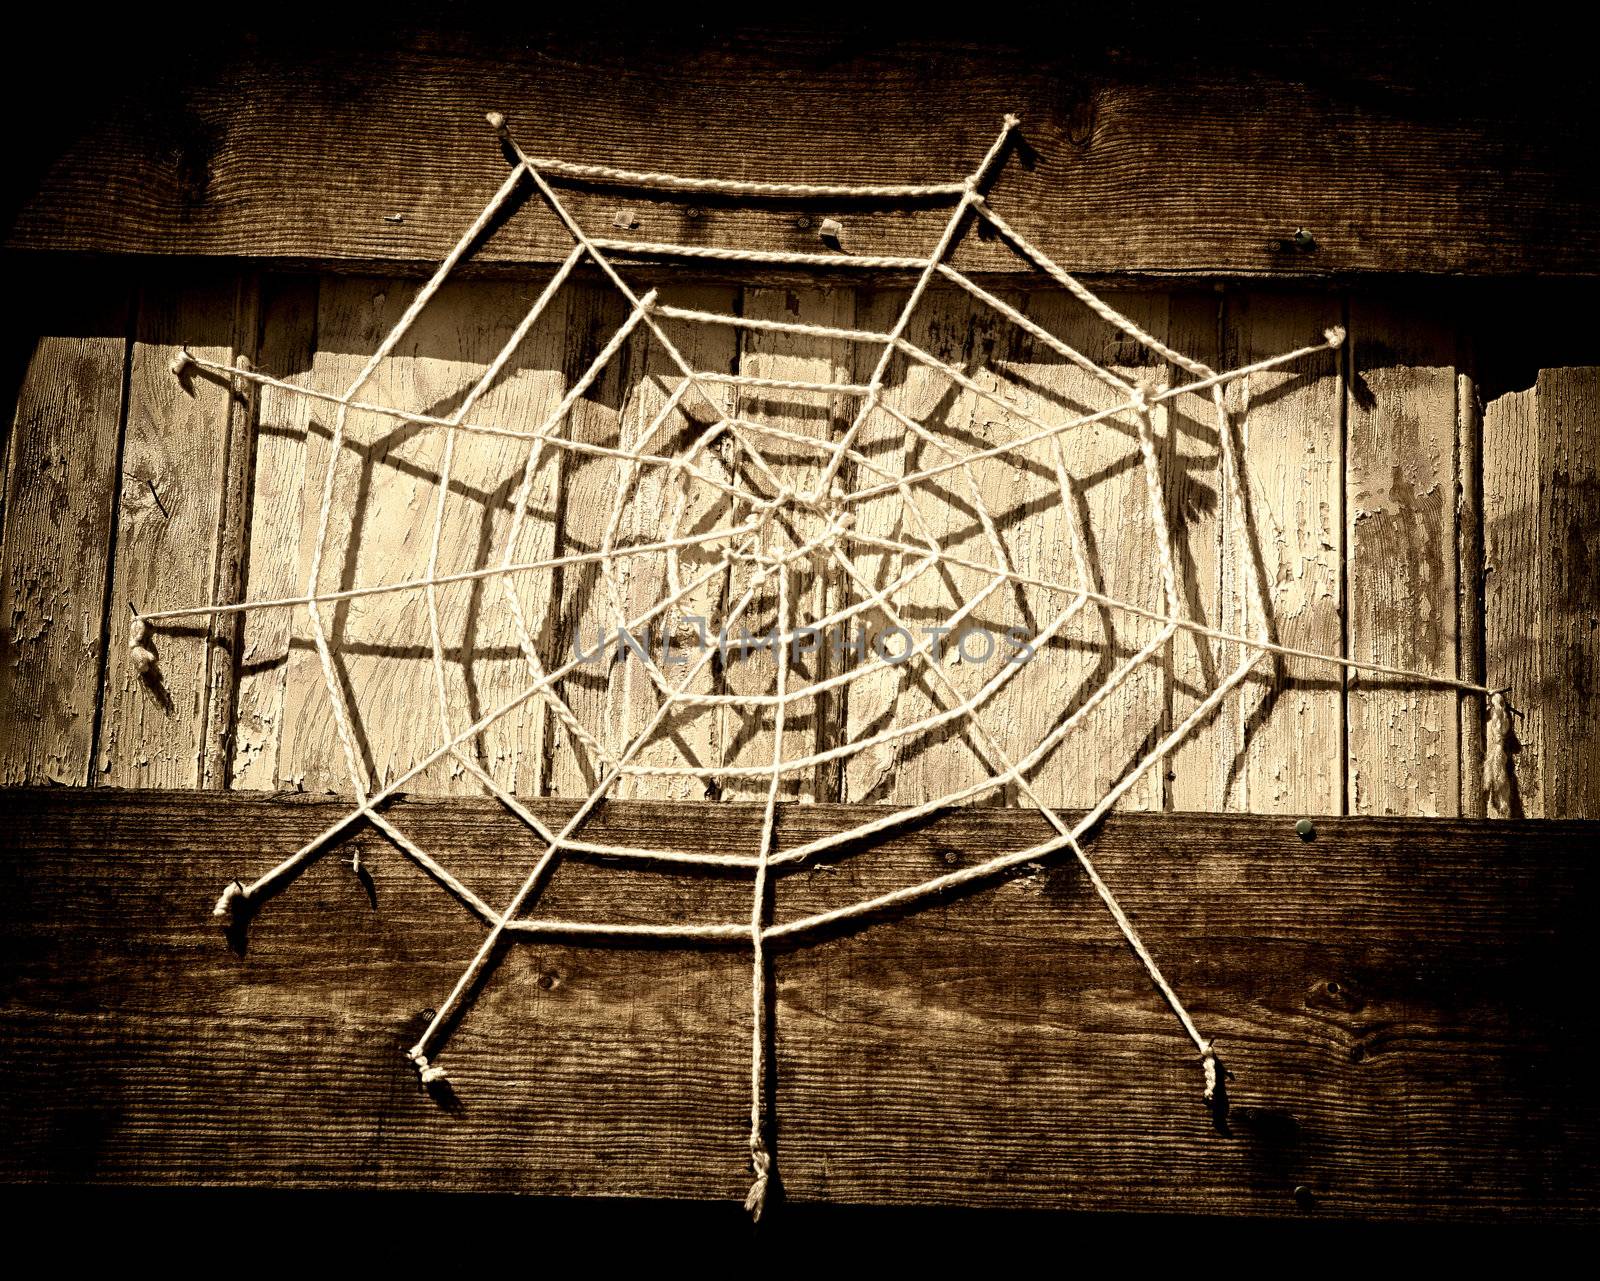 Artistic and conseptual spider web.